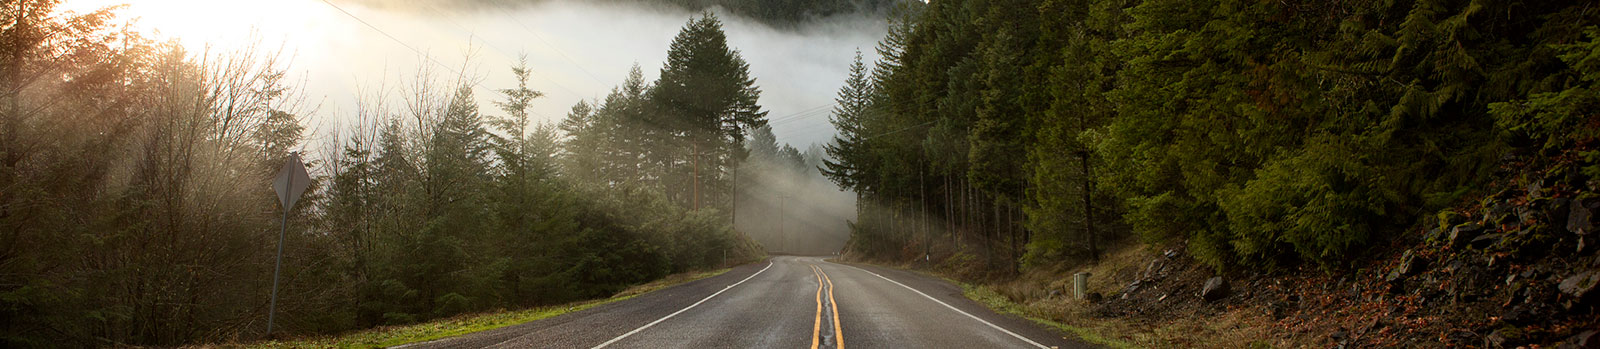 Road with luscious trees on both sides and early morning fog